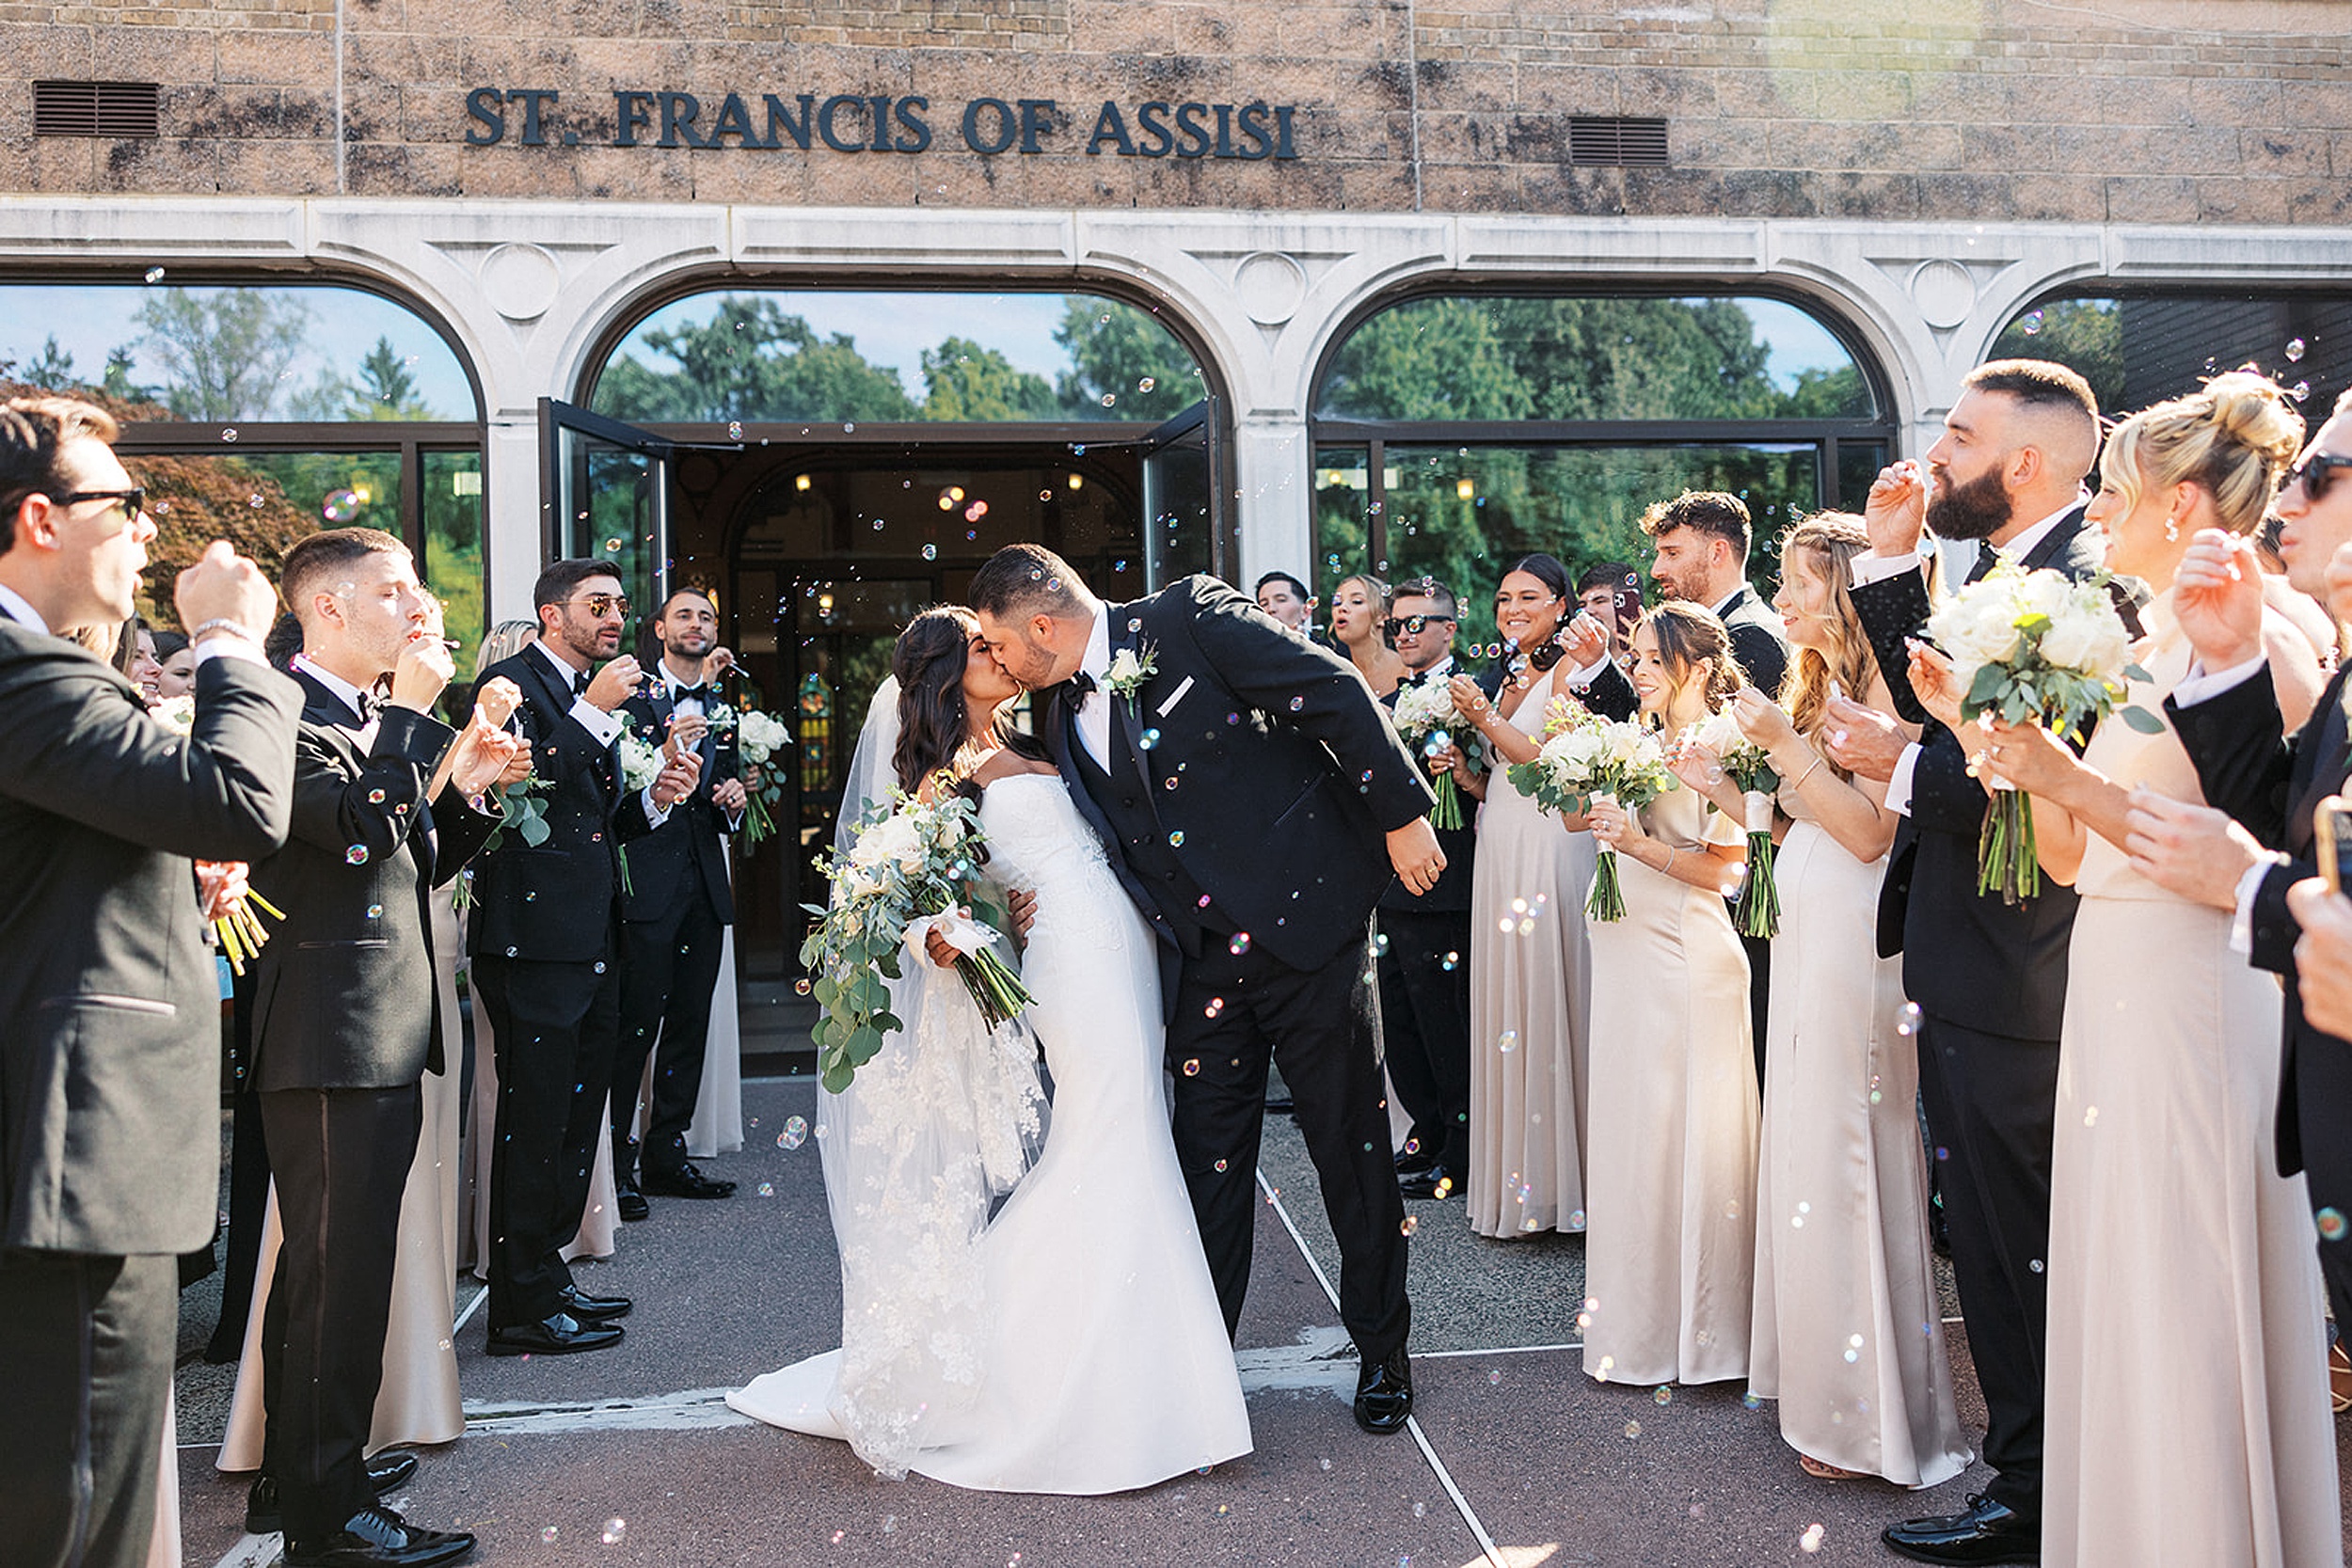 Newlyweds kiss and dip under a shower of bubbles surrounded by their wedding party